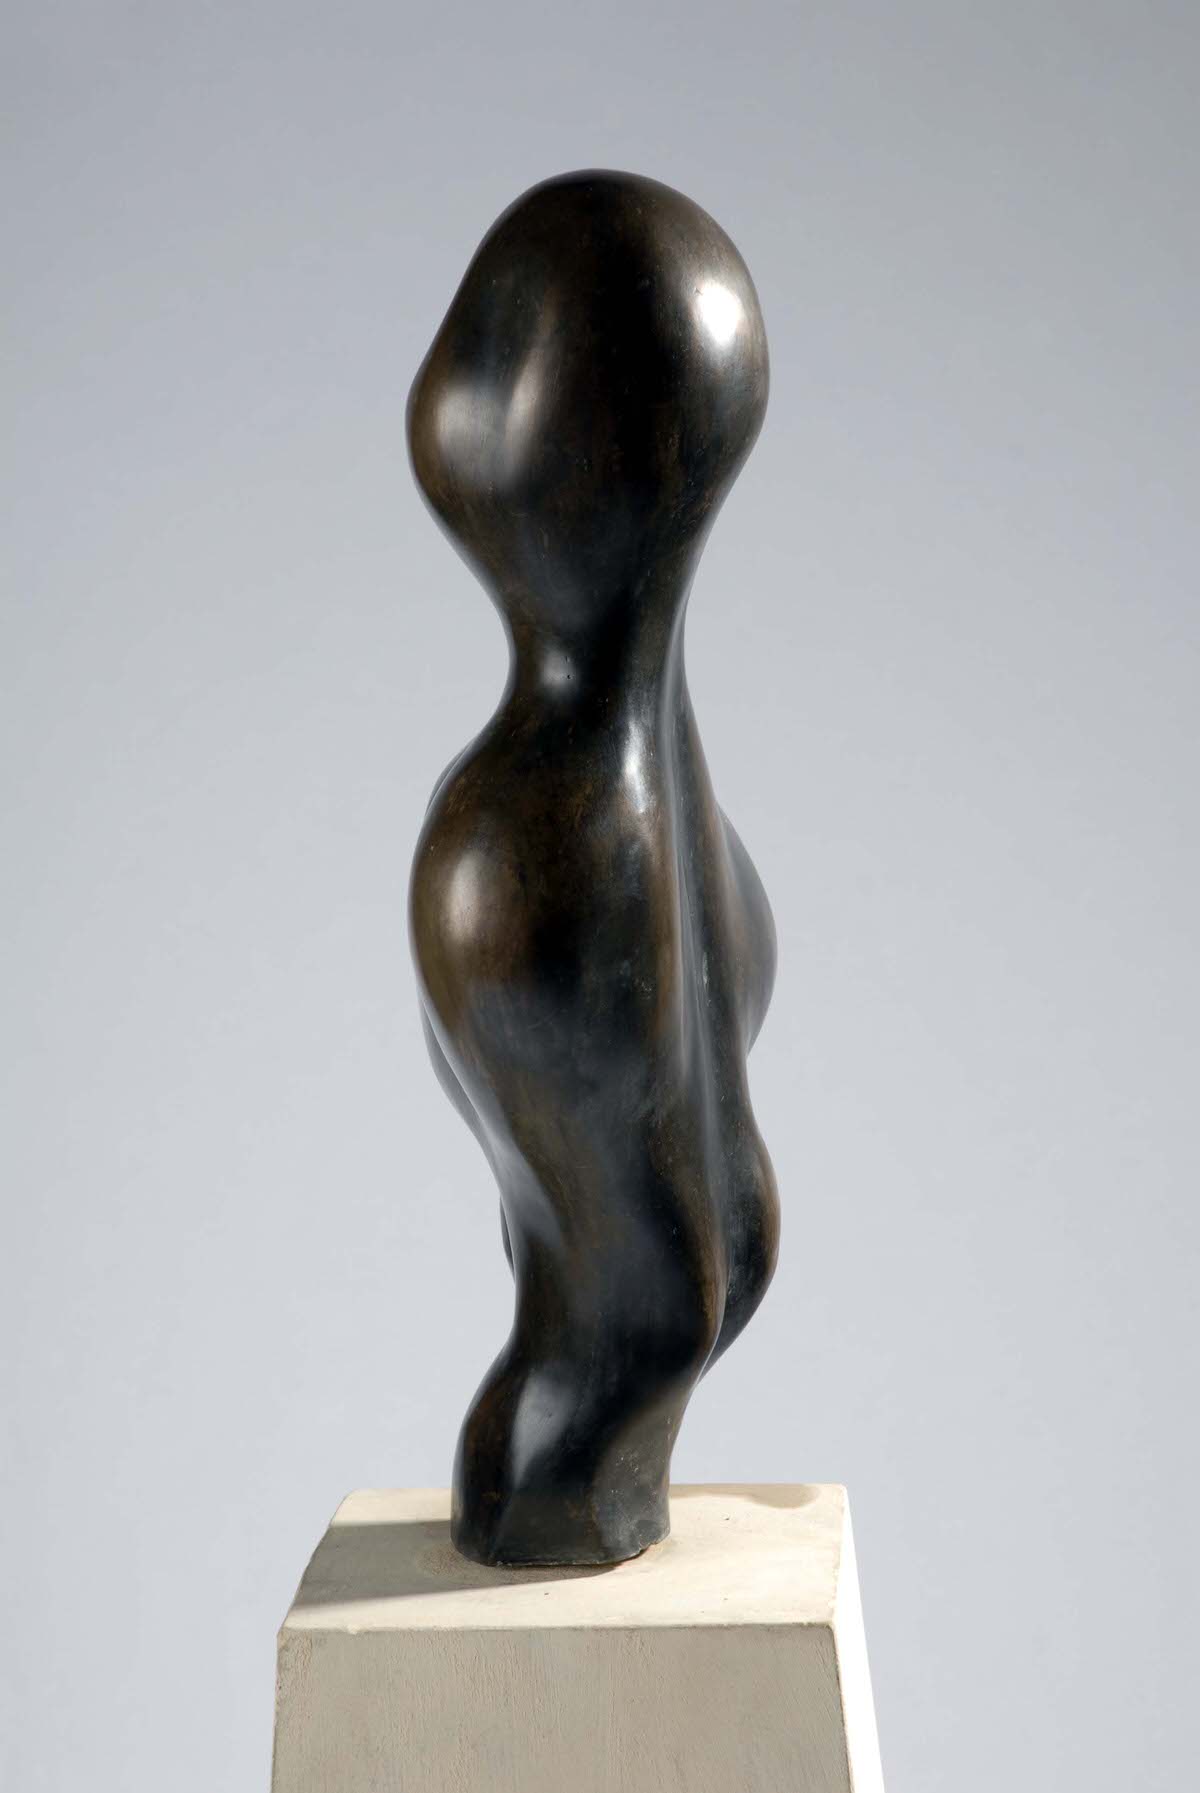 Golgi Body female sculpture human from sculpture abstract british contemporary sculpture gagosian gallery by Mark Reed